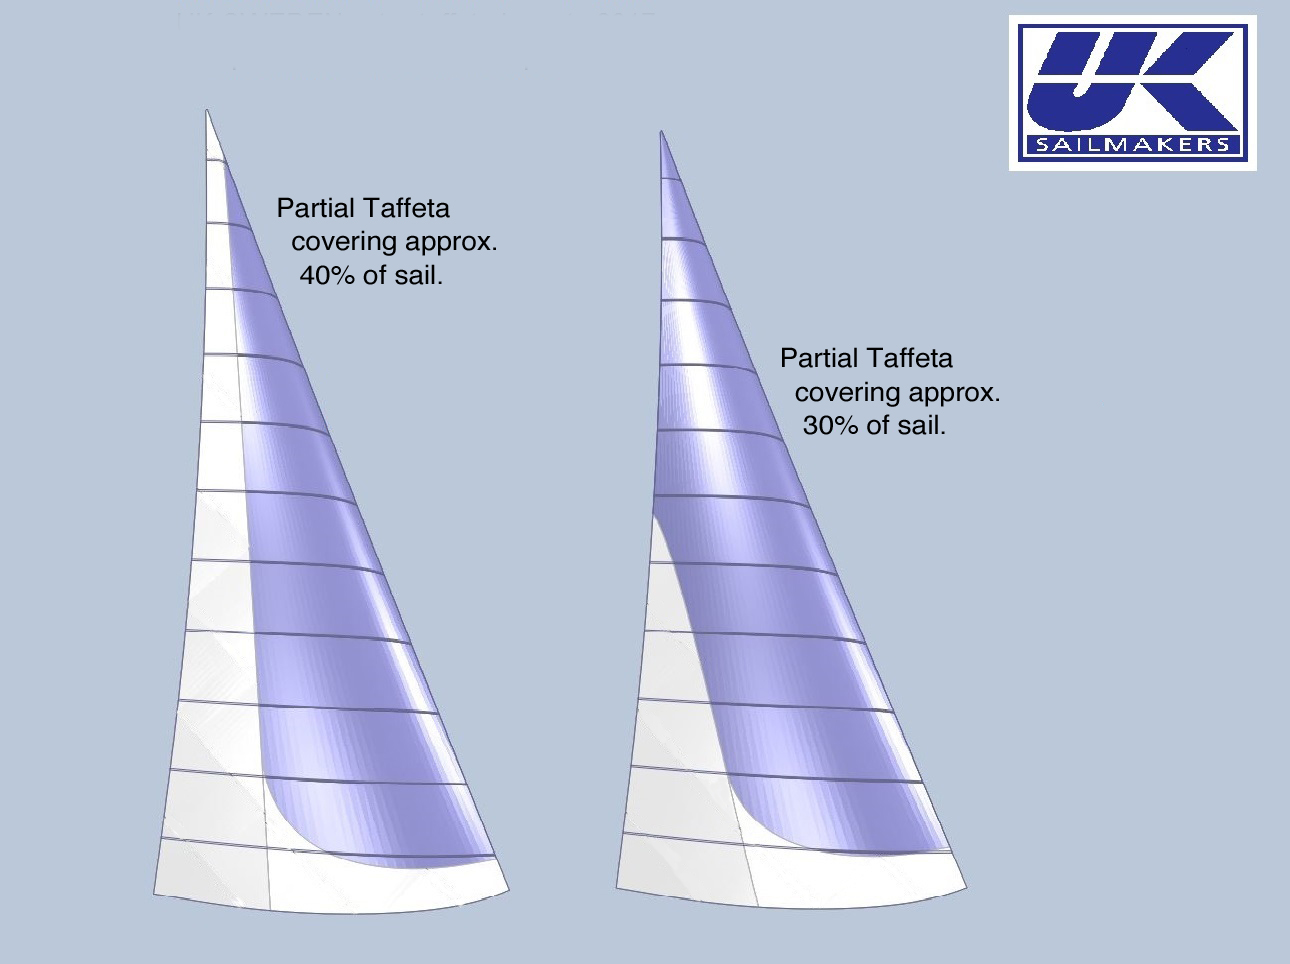 The white areas in the drawings show where taffeta can be applied on an overlapping genoa.